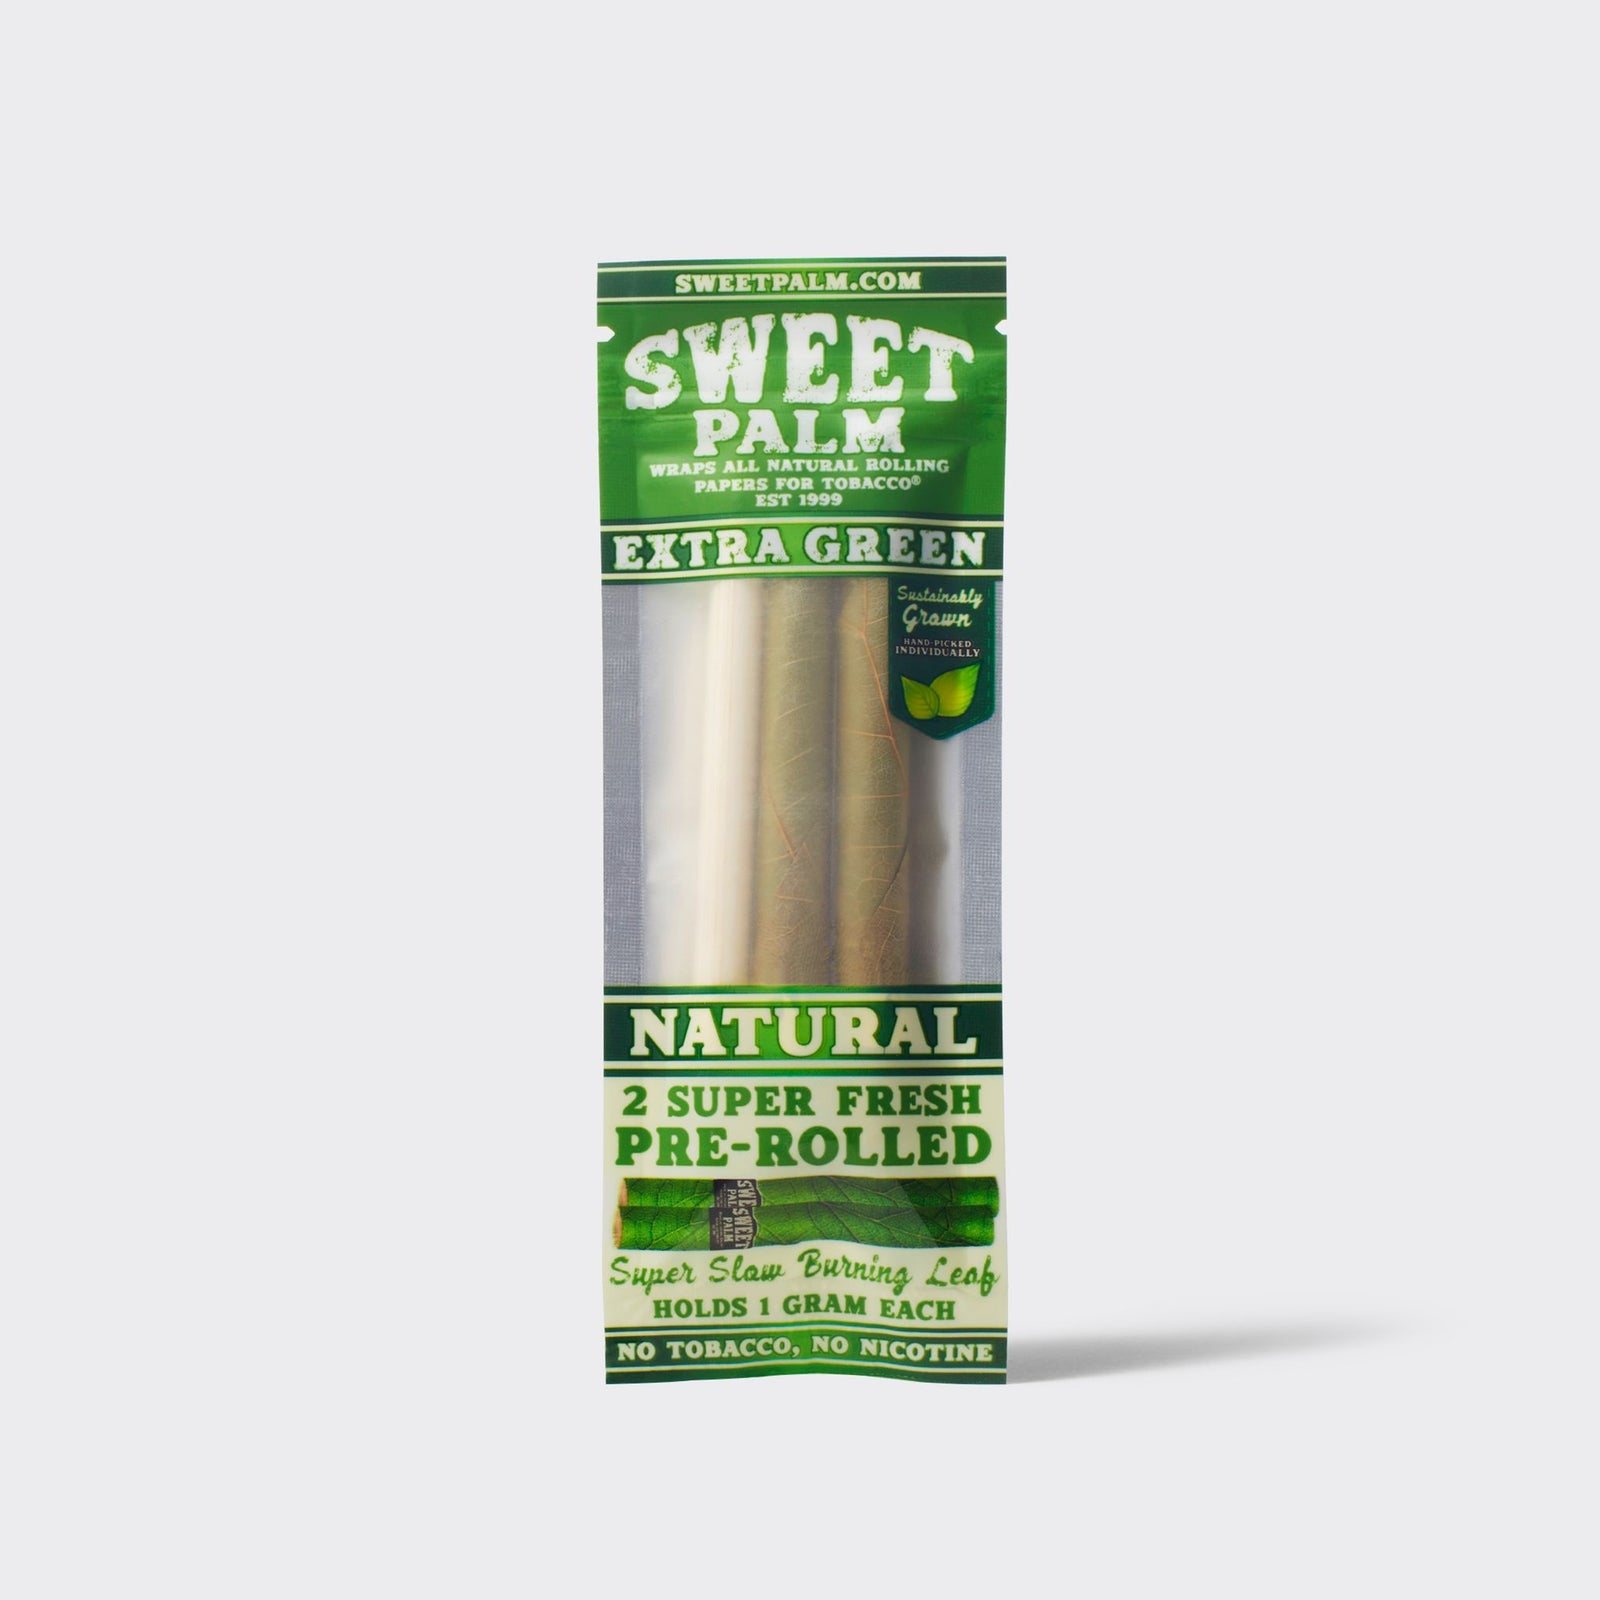 Sweet Palms Rolled Leaf (All Natural)